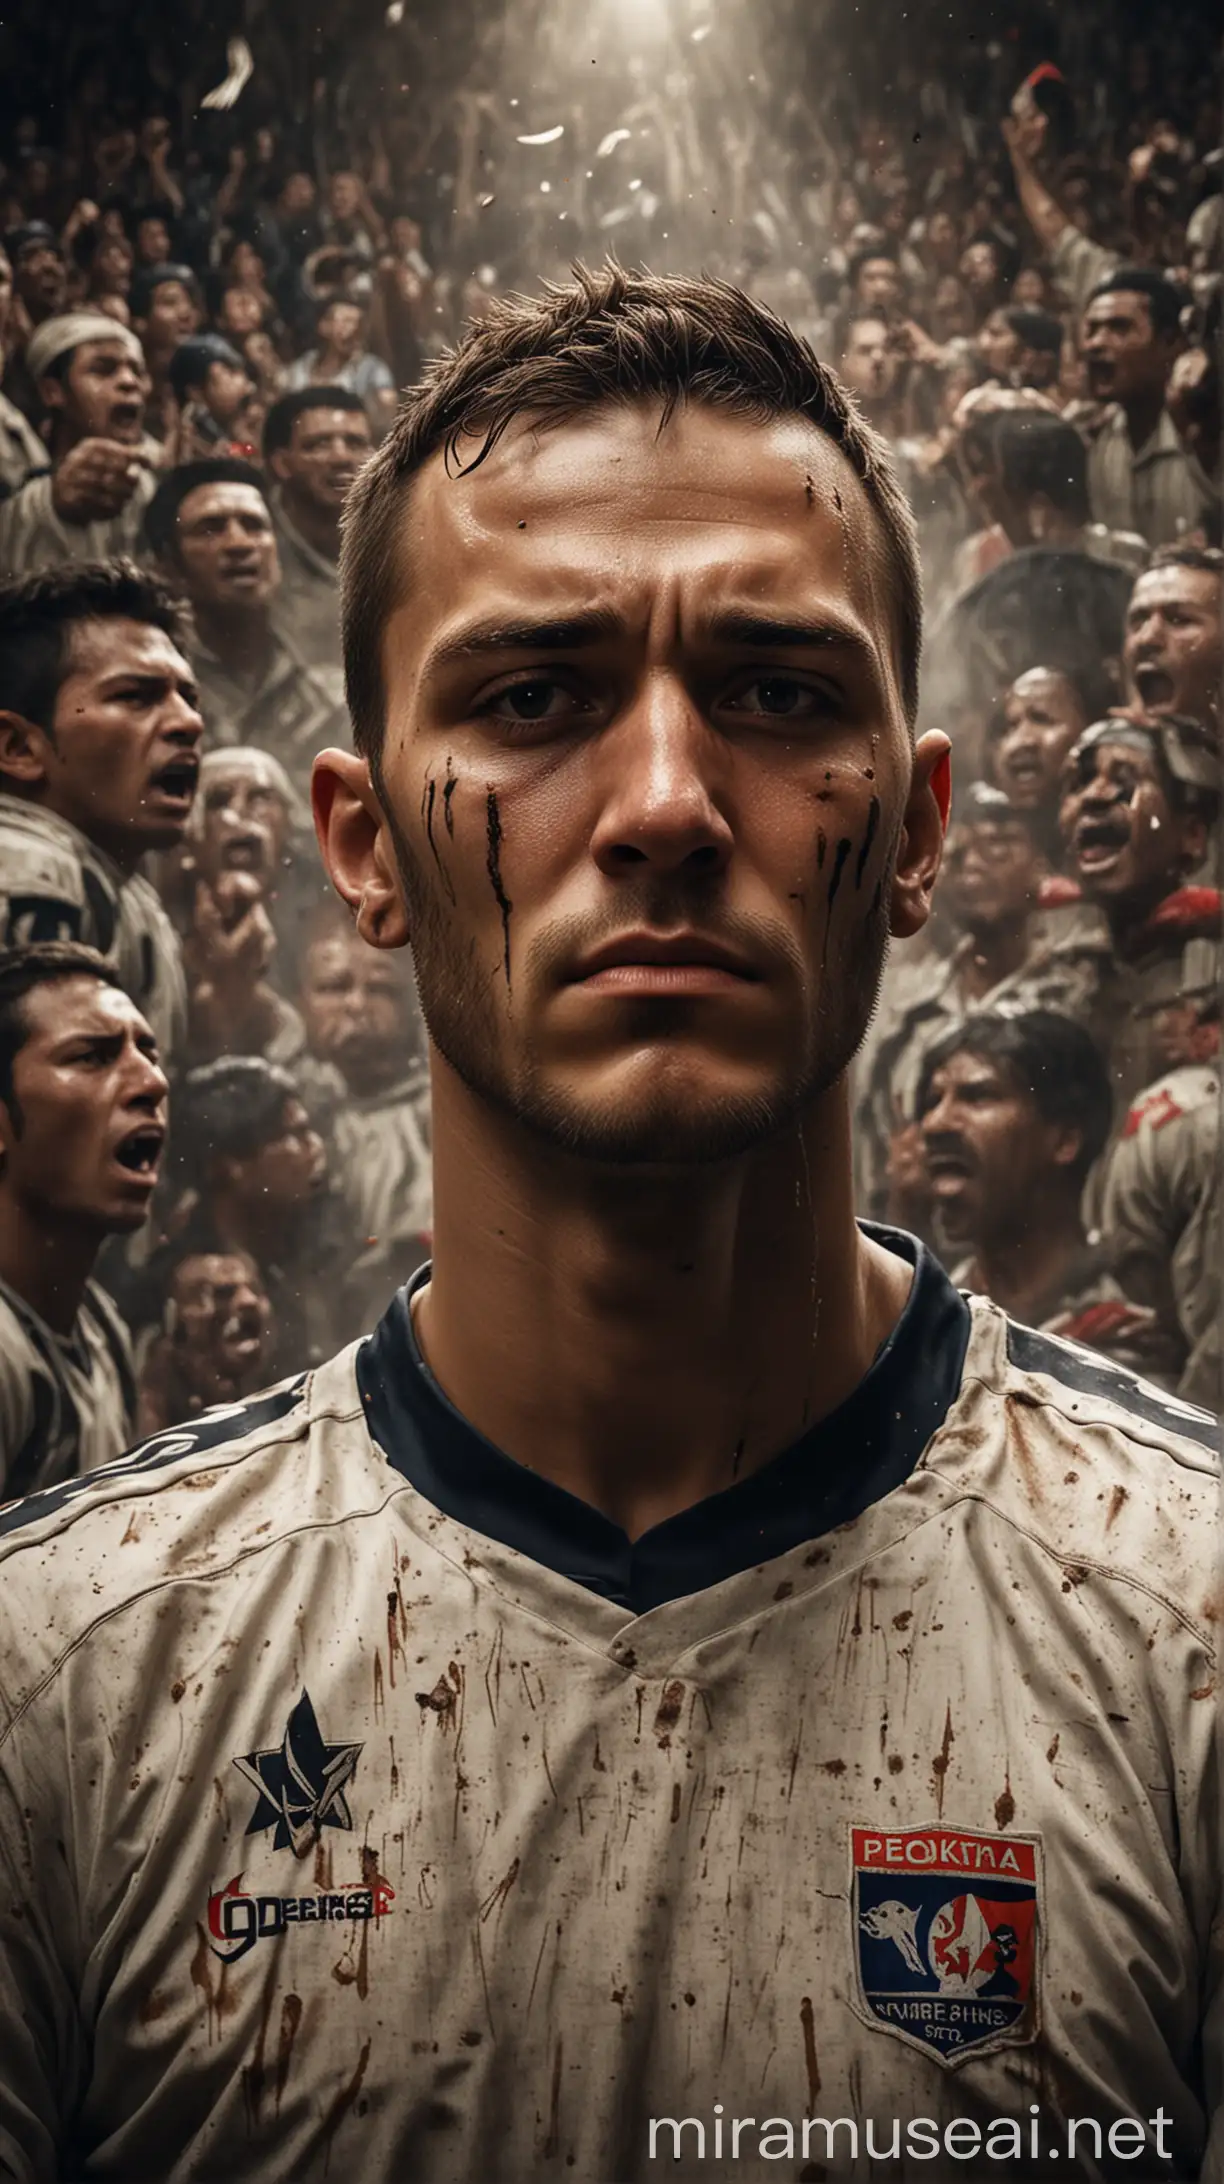  Depict the emotional and tense final moments of the losing team's captain in the Pokotar game, with a ceremonial backdrop, emphasizing the cultural significance and brutality of the game.. hyper realistic